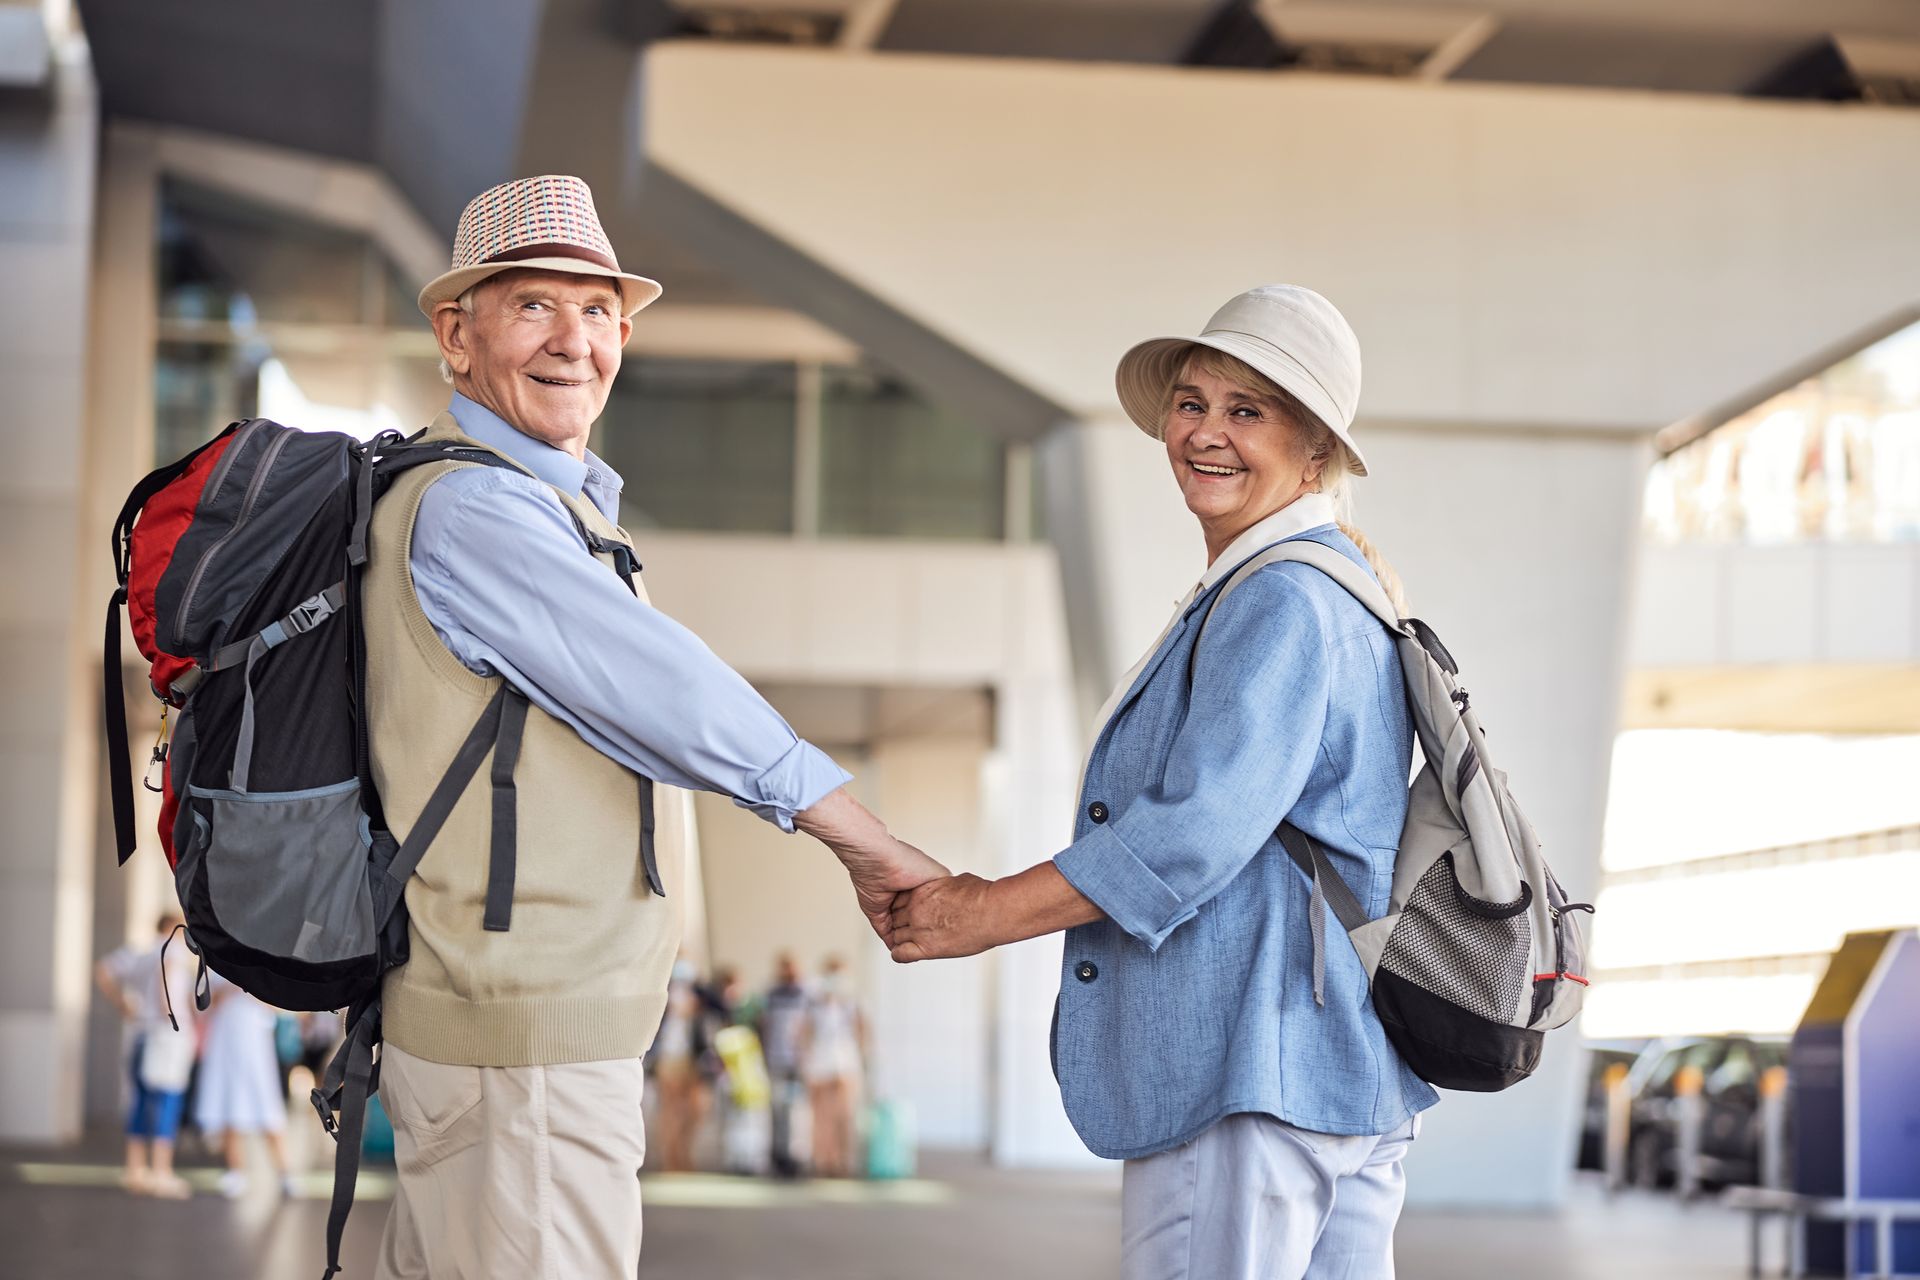 Seniors traveling with a Medicare Advantage health plan